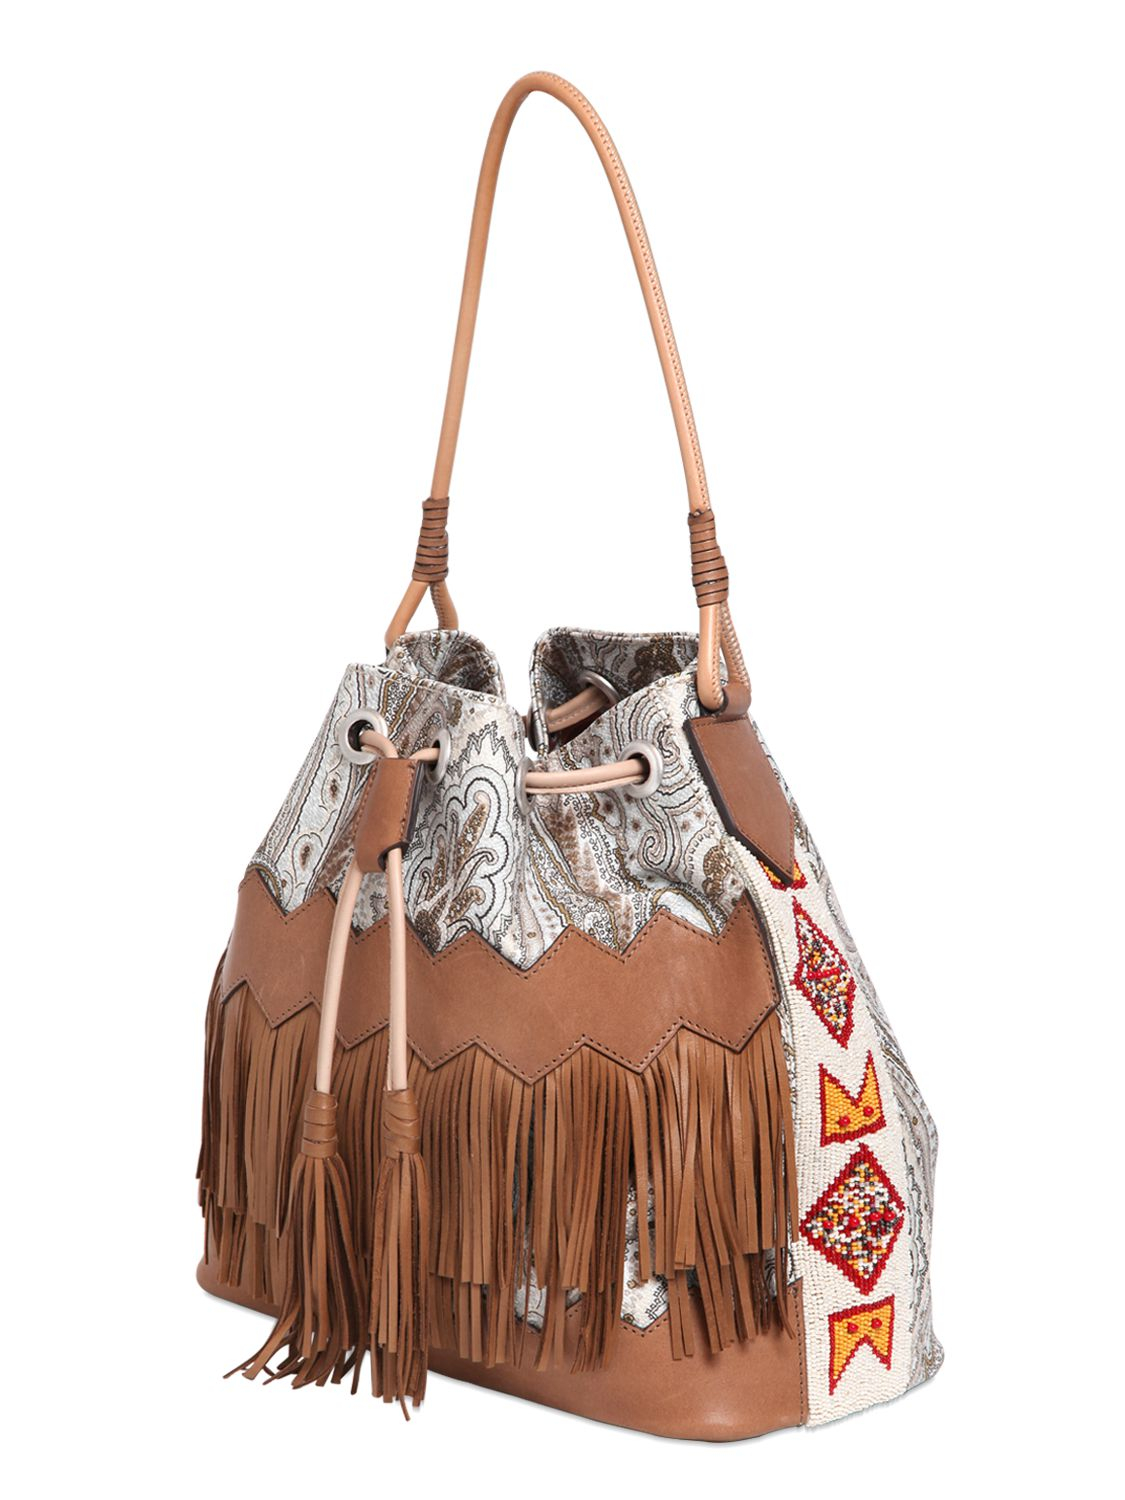 Etro Paisley Bucket Bag With Leather Fringe in Brown | Lyst